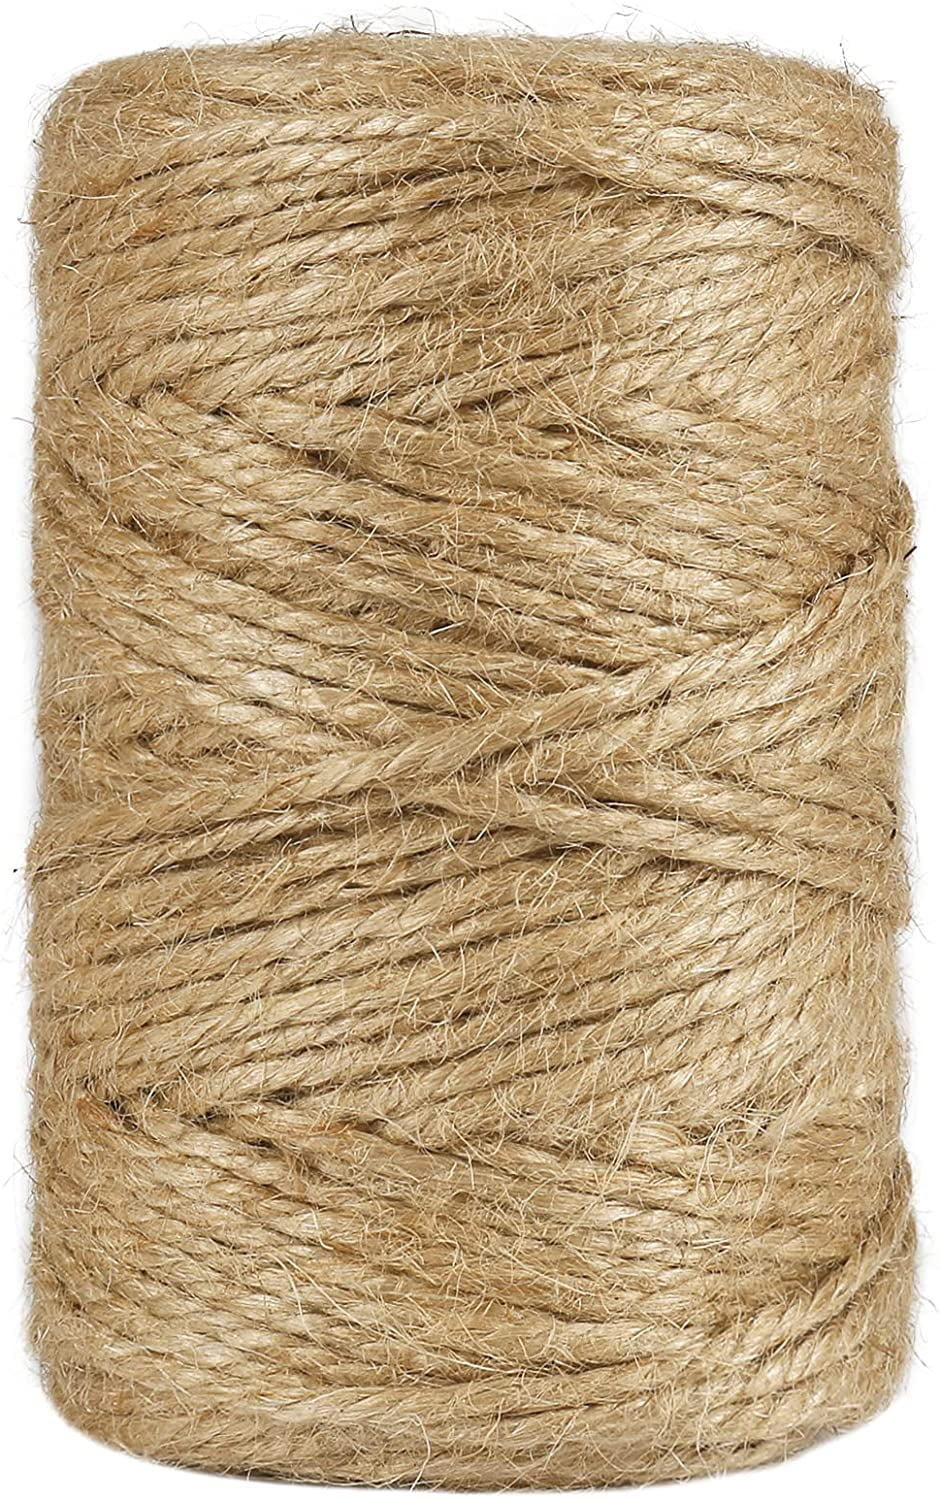  Anwyll Twine String,White Cotton Twine String,656 Feet Natural  Jute Twine String for Crafts,Gardening,Gift Wrapping,Kitchen Cooking Bakers  Twine for Rotisserie Chicken,Turkey and Meat : Tools & Home Improvement